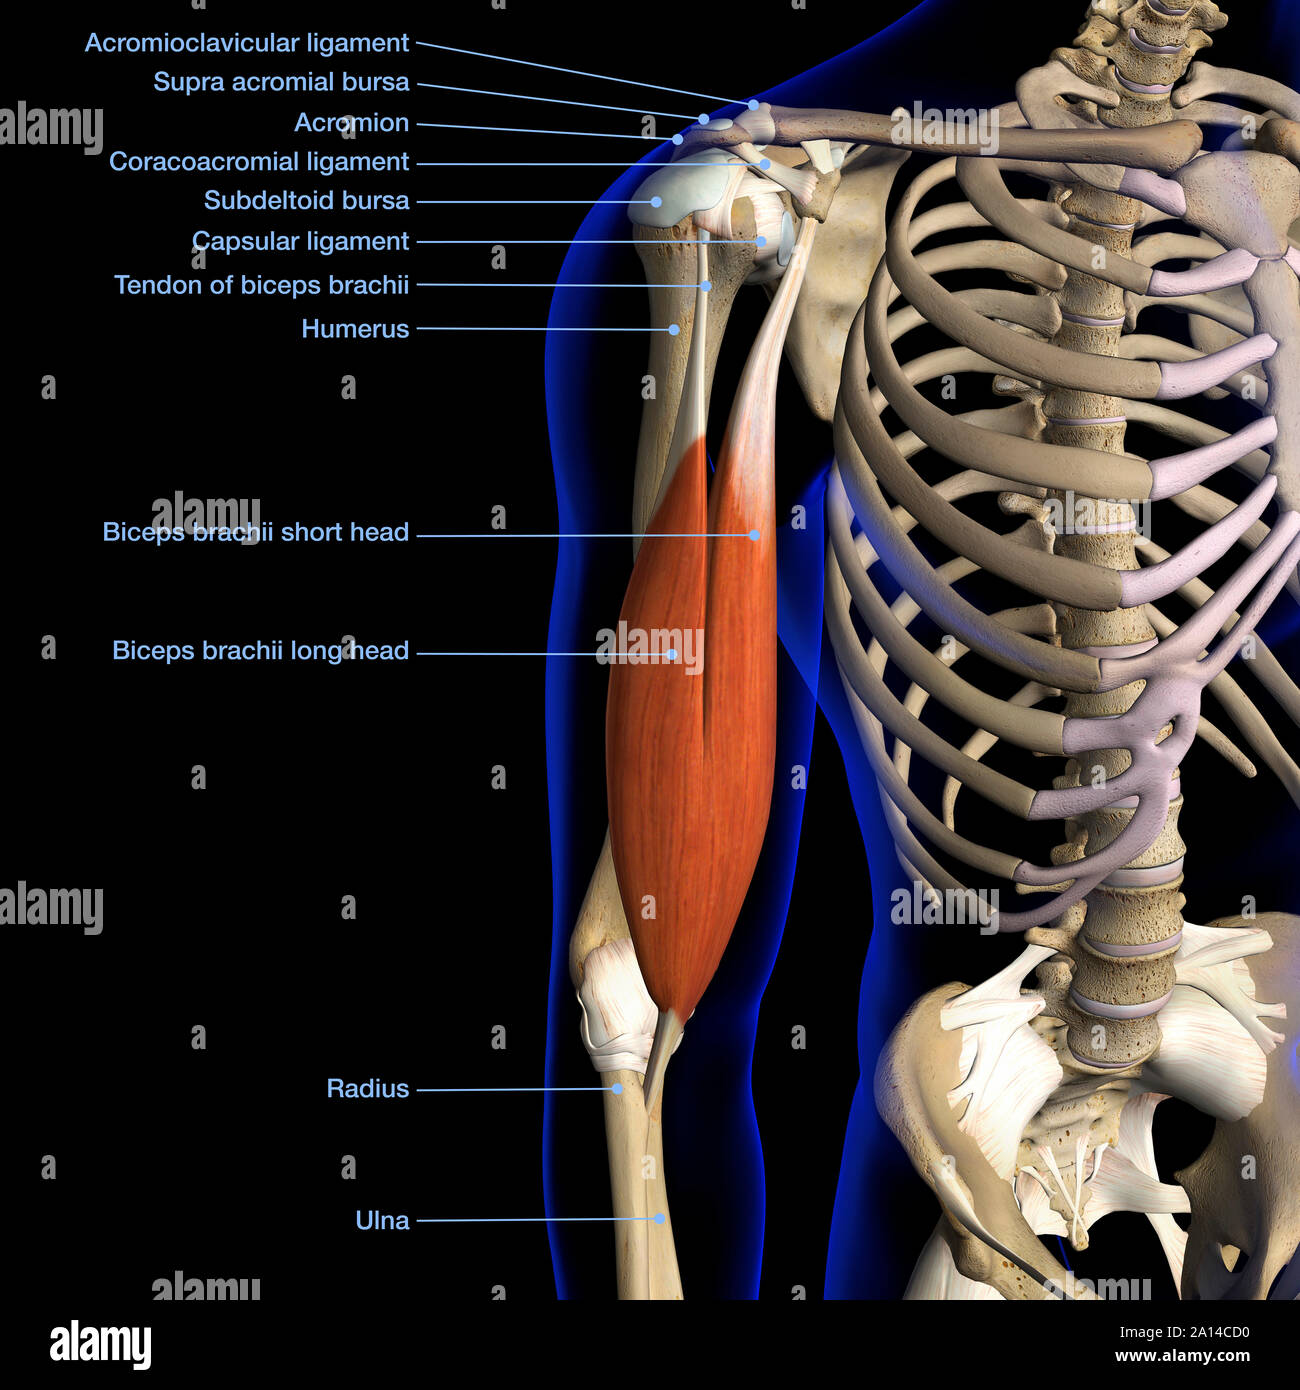 Labeled anatomy chart of male biceps muscle and shoulder ligaments, black background. Stock Photo